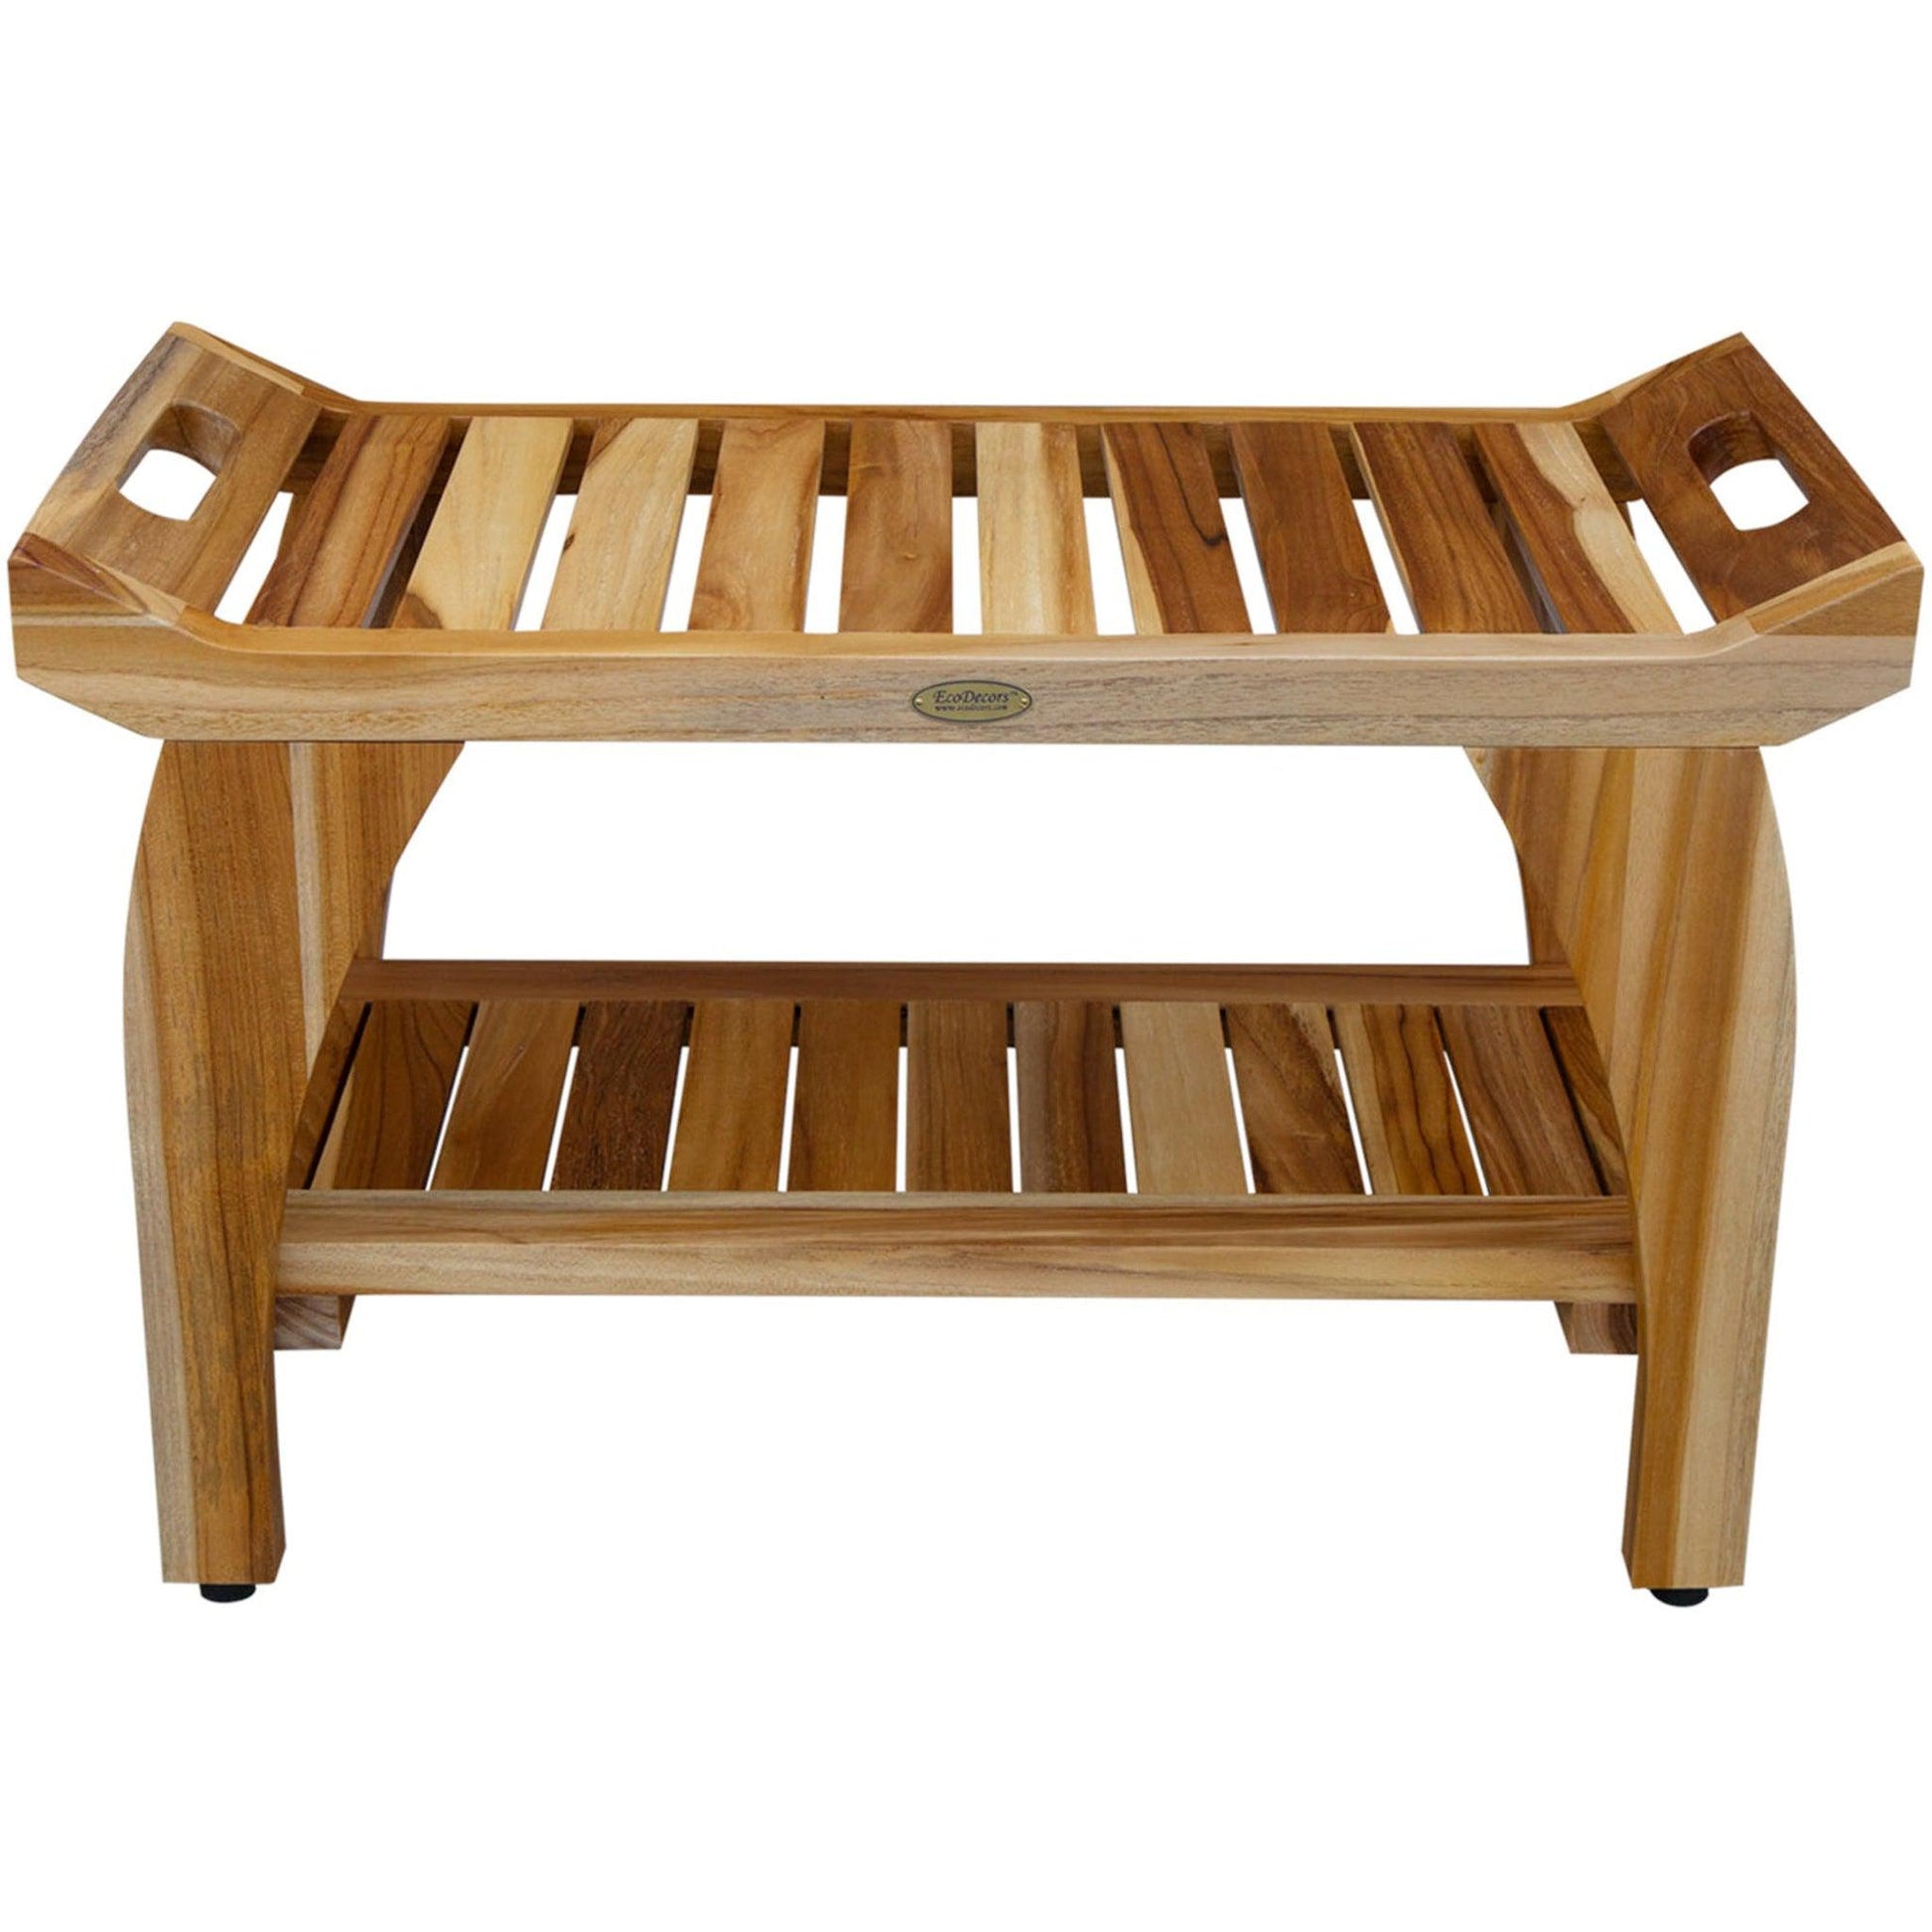 https://usbathstore.com/cdn/shop/files/EcoDecors-Tranquility-29-EarthyTeak-Solid-Teak-Wood-Shower-Bench-With-Shelf-and-LiftAide-Arms.jpg?v=1694729313&width=1946